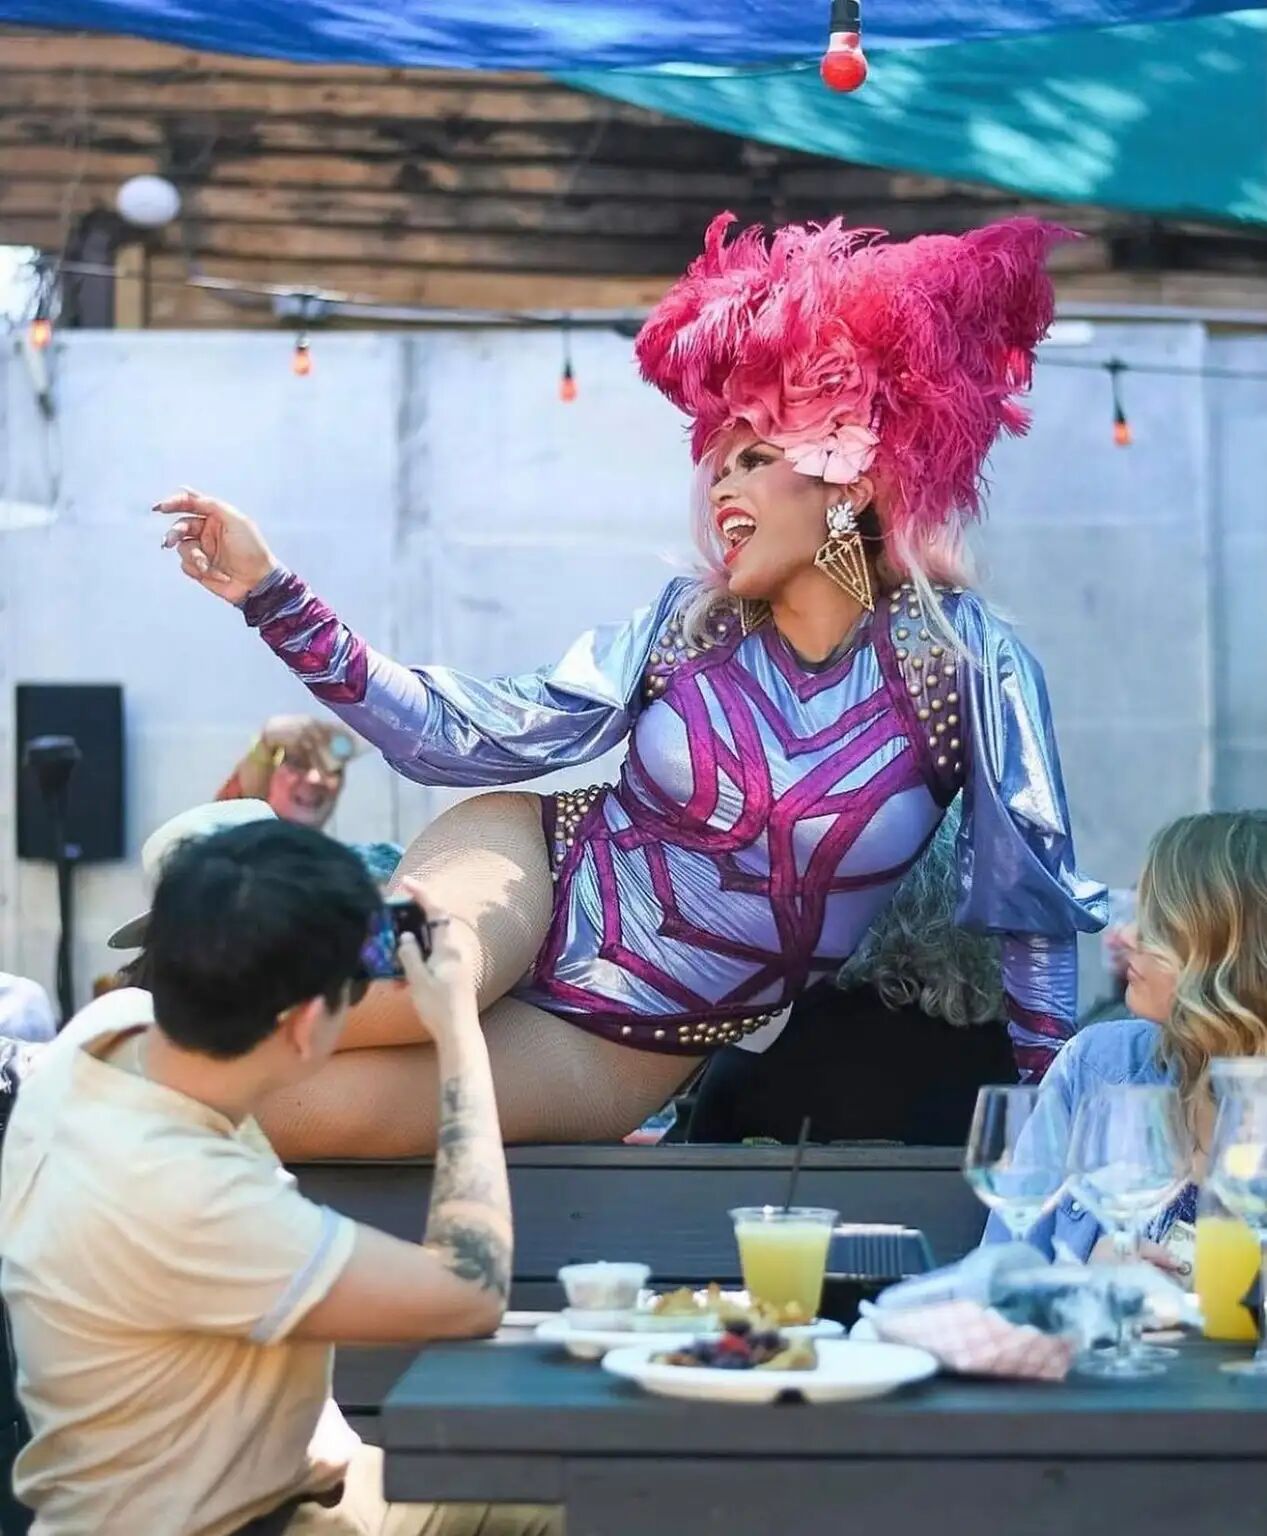 Drag Queen sits on top of a couples table, serenading them